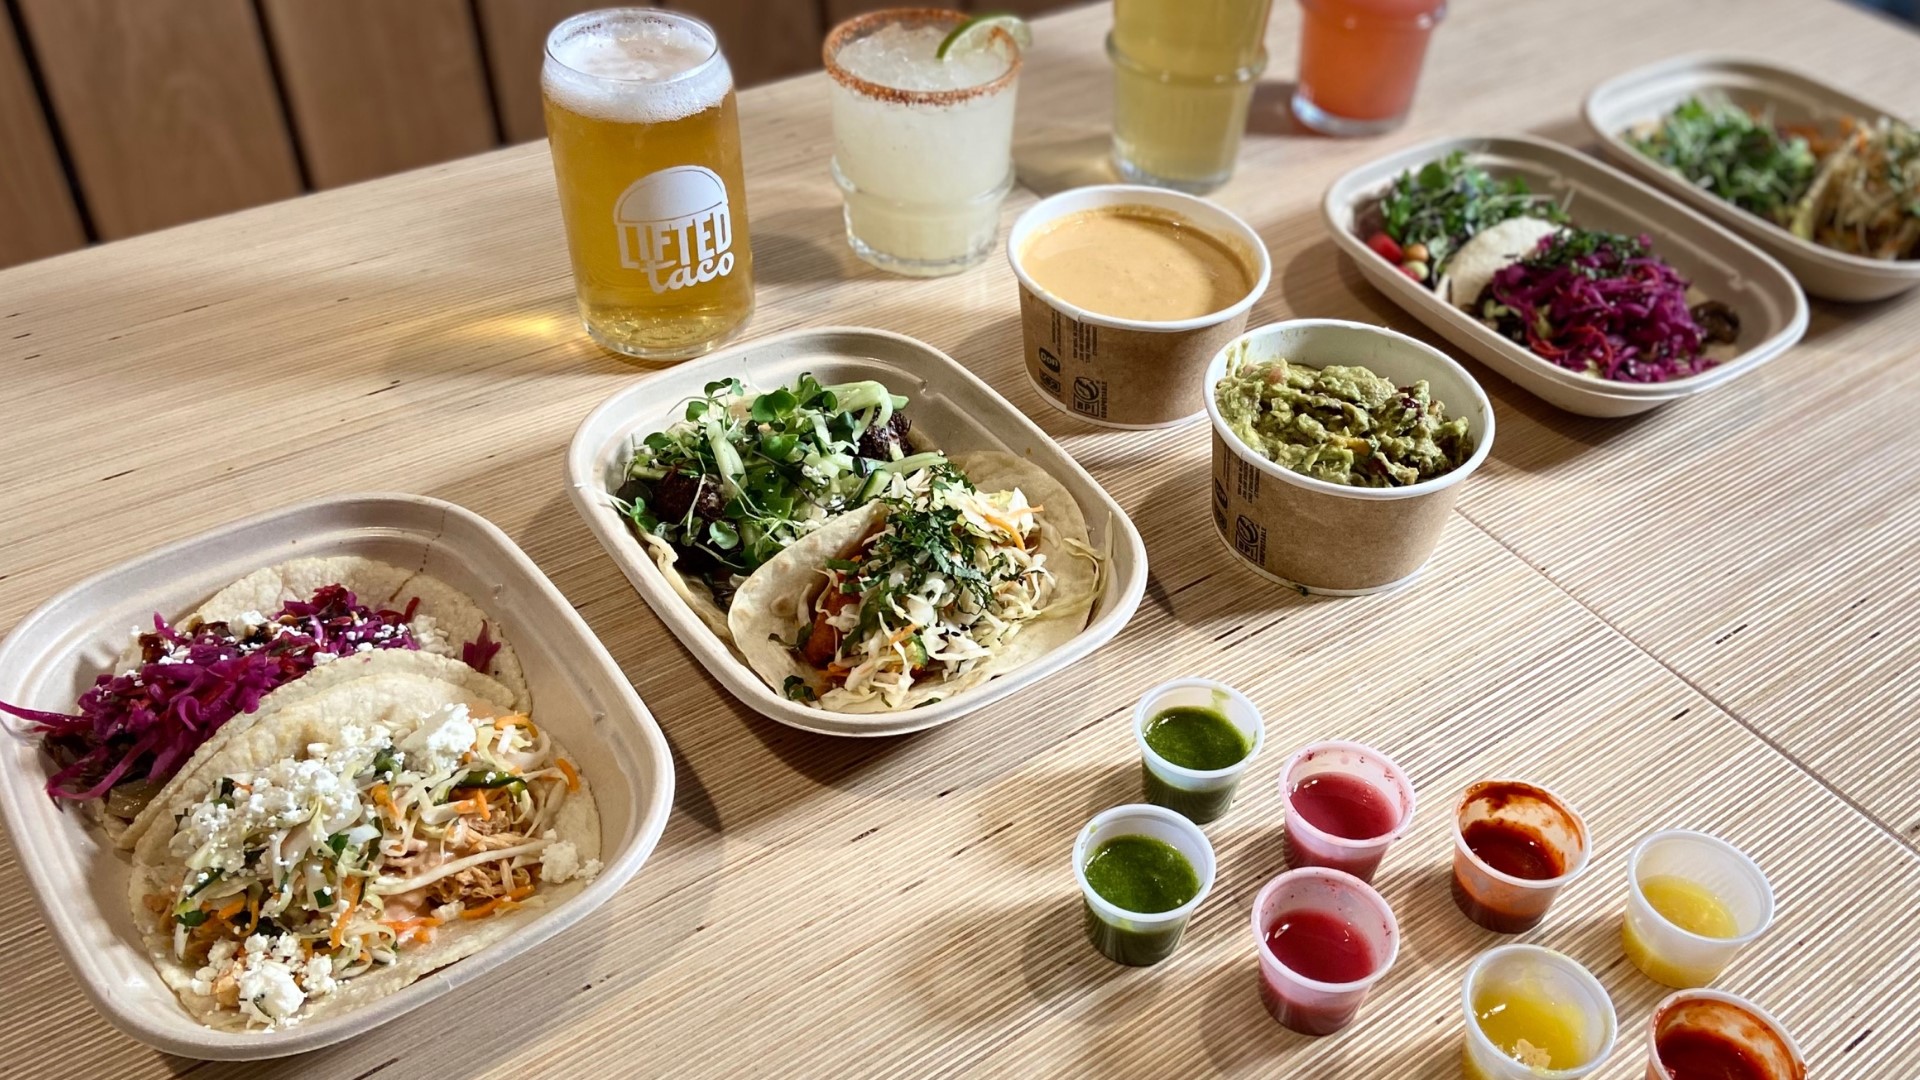 Lifted Taco owner John Cannon ate tacos around the country prior to opening this casual eatery in 2020. #k5evening